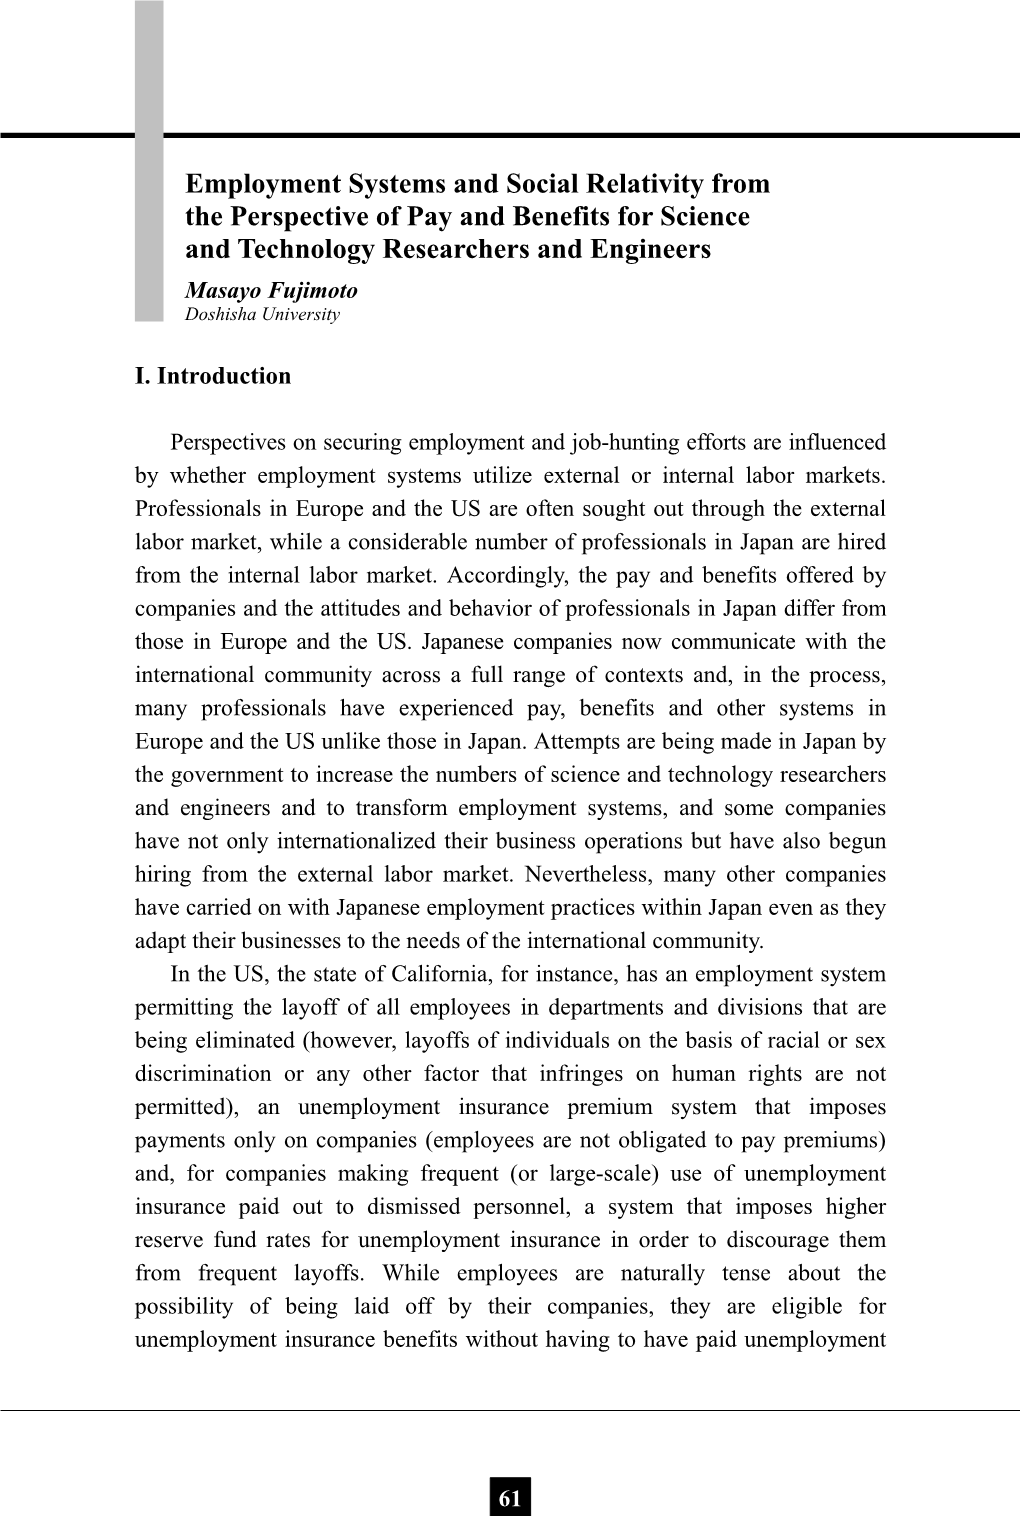 Employment Systems and Social Relativity from the Perspective Of